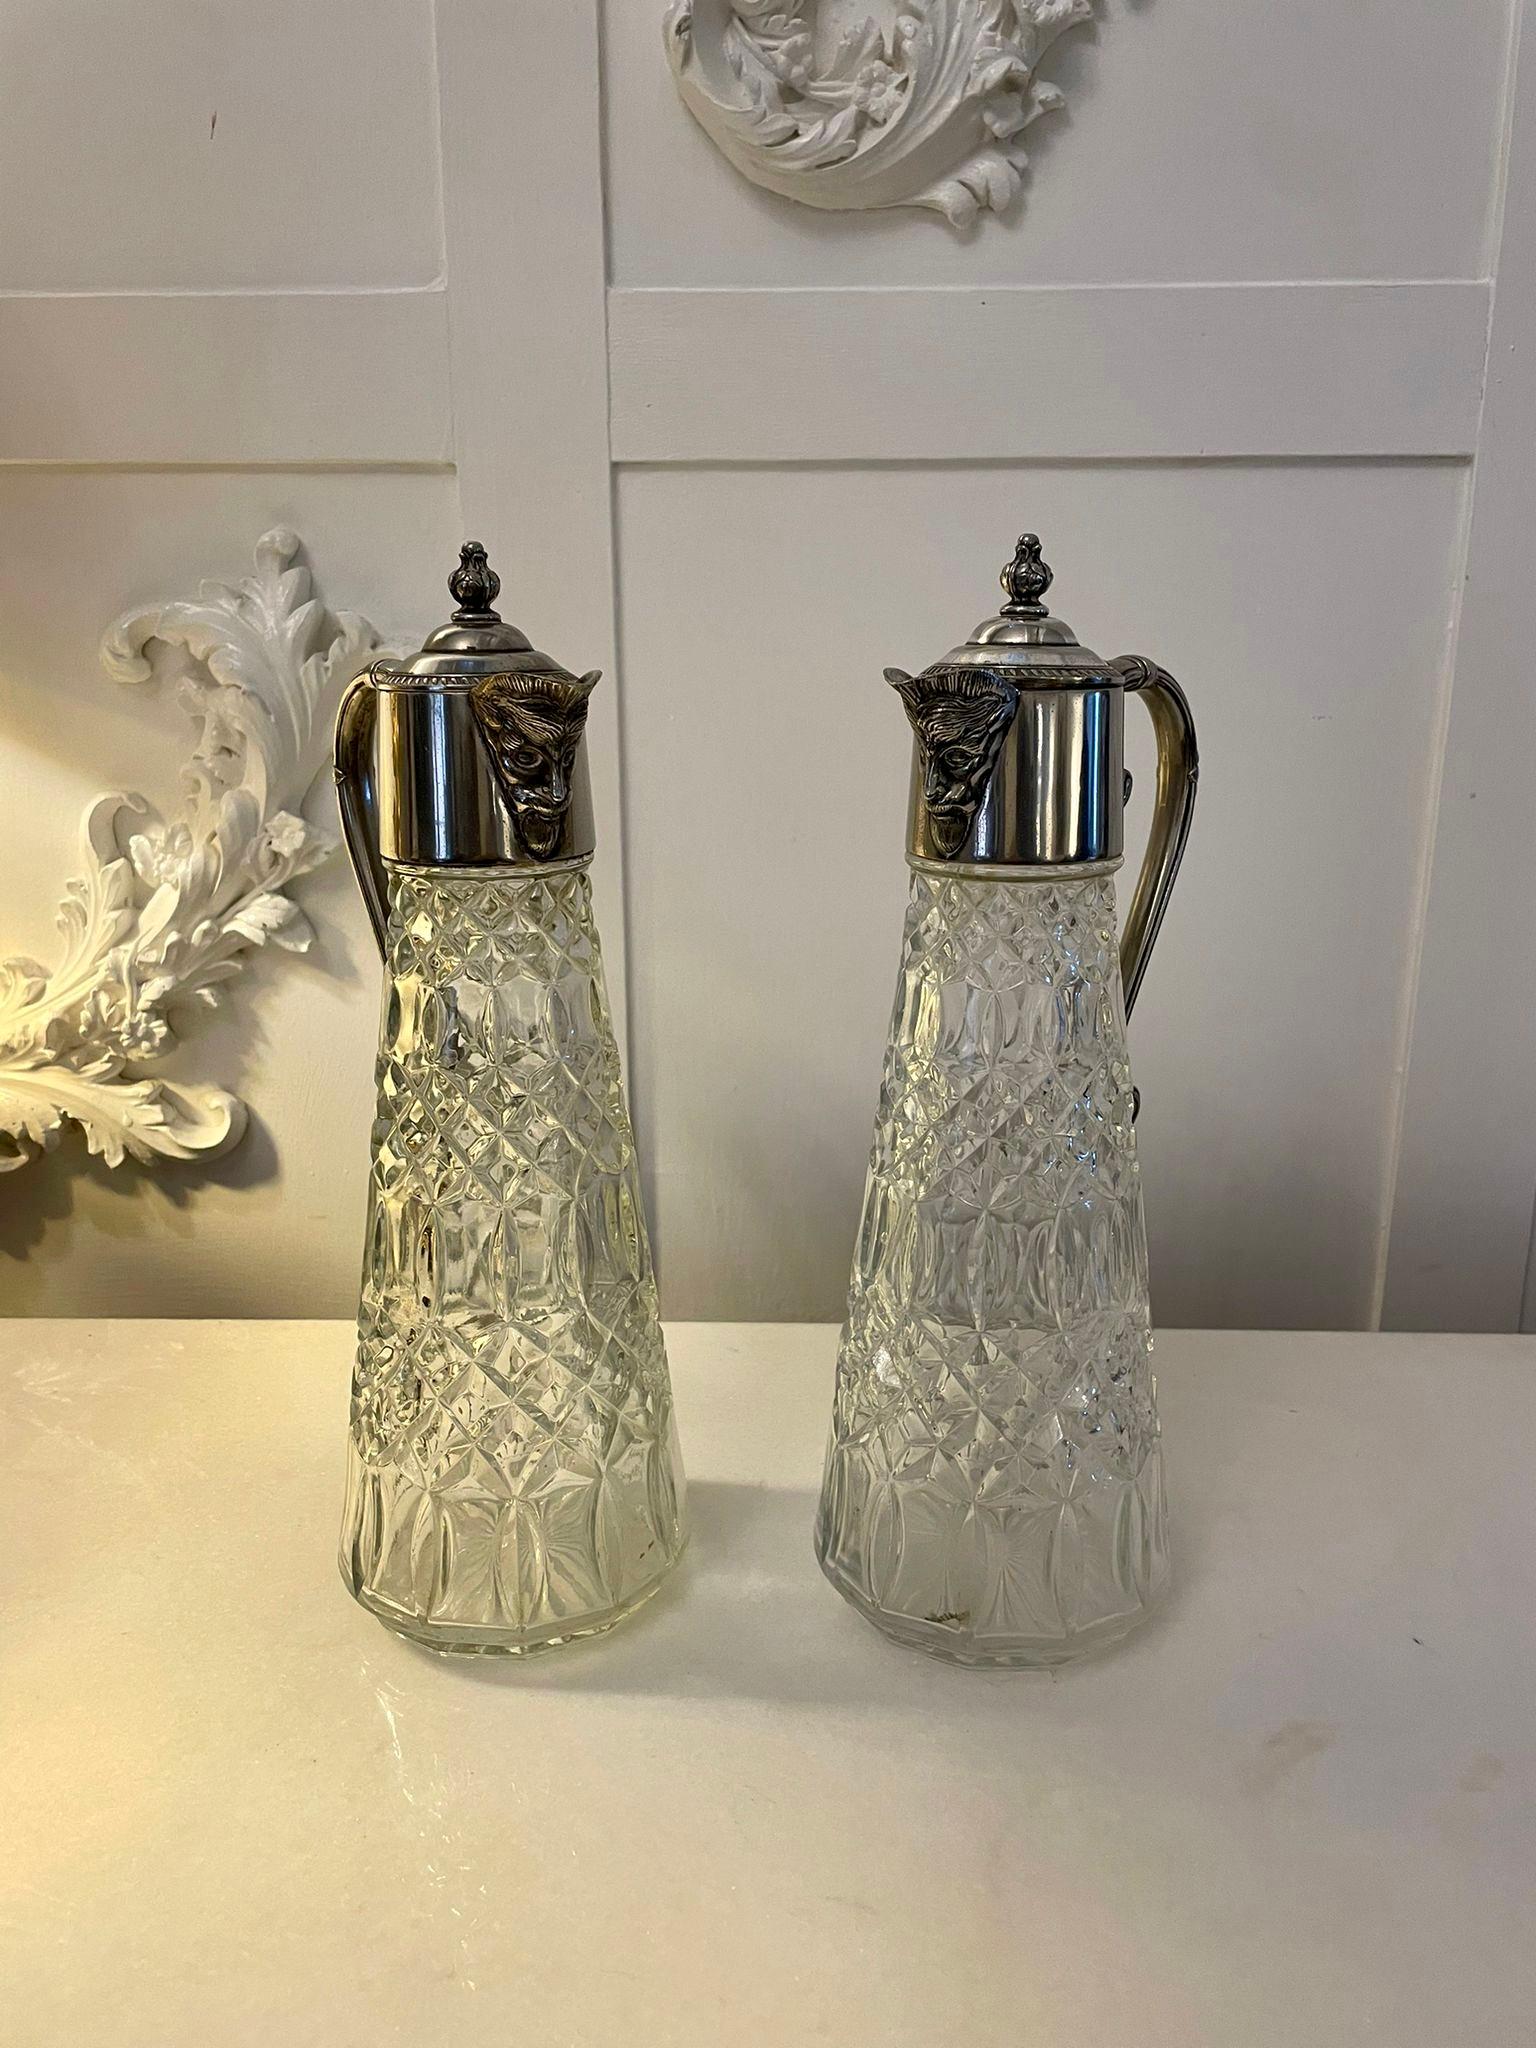 Pair of Antique Edwardian Quality Silver Plated and Cut Glass Claret Jugs For Sale 5